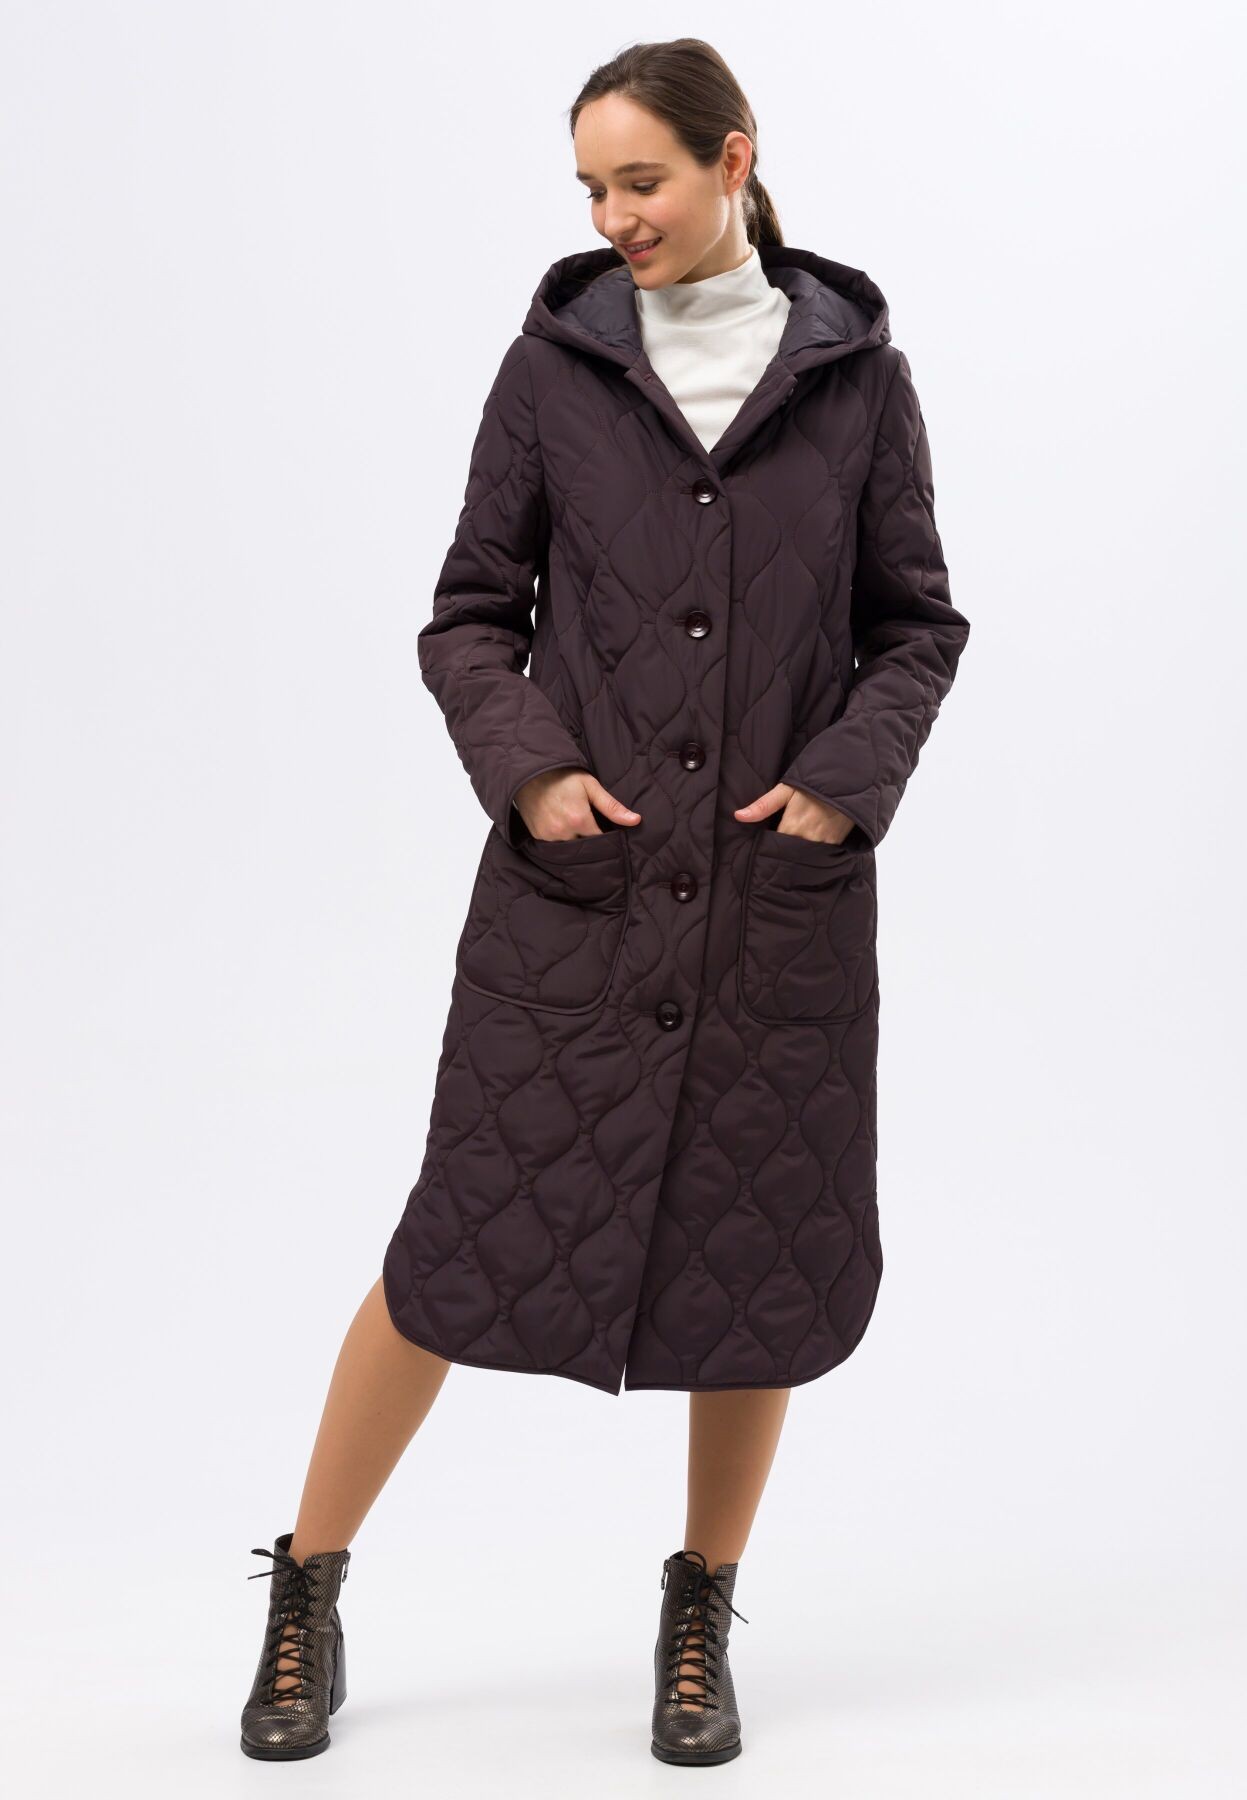 Warm quilted coat in dark chocolate shade 4421